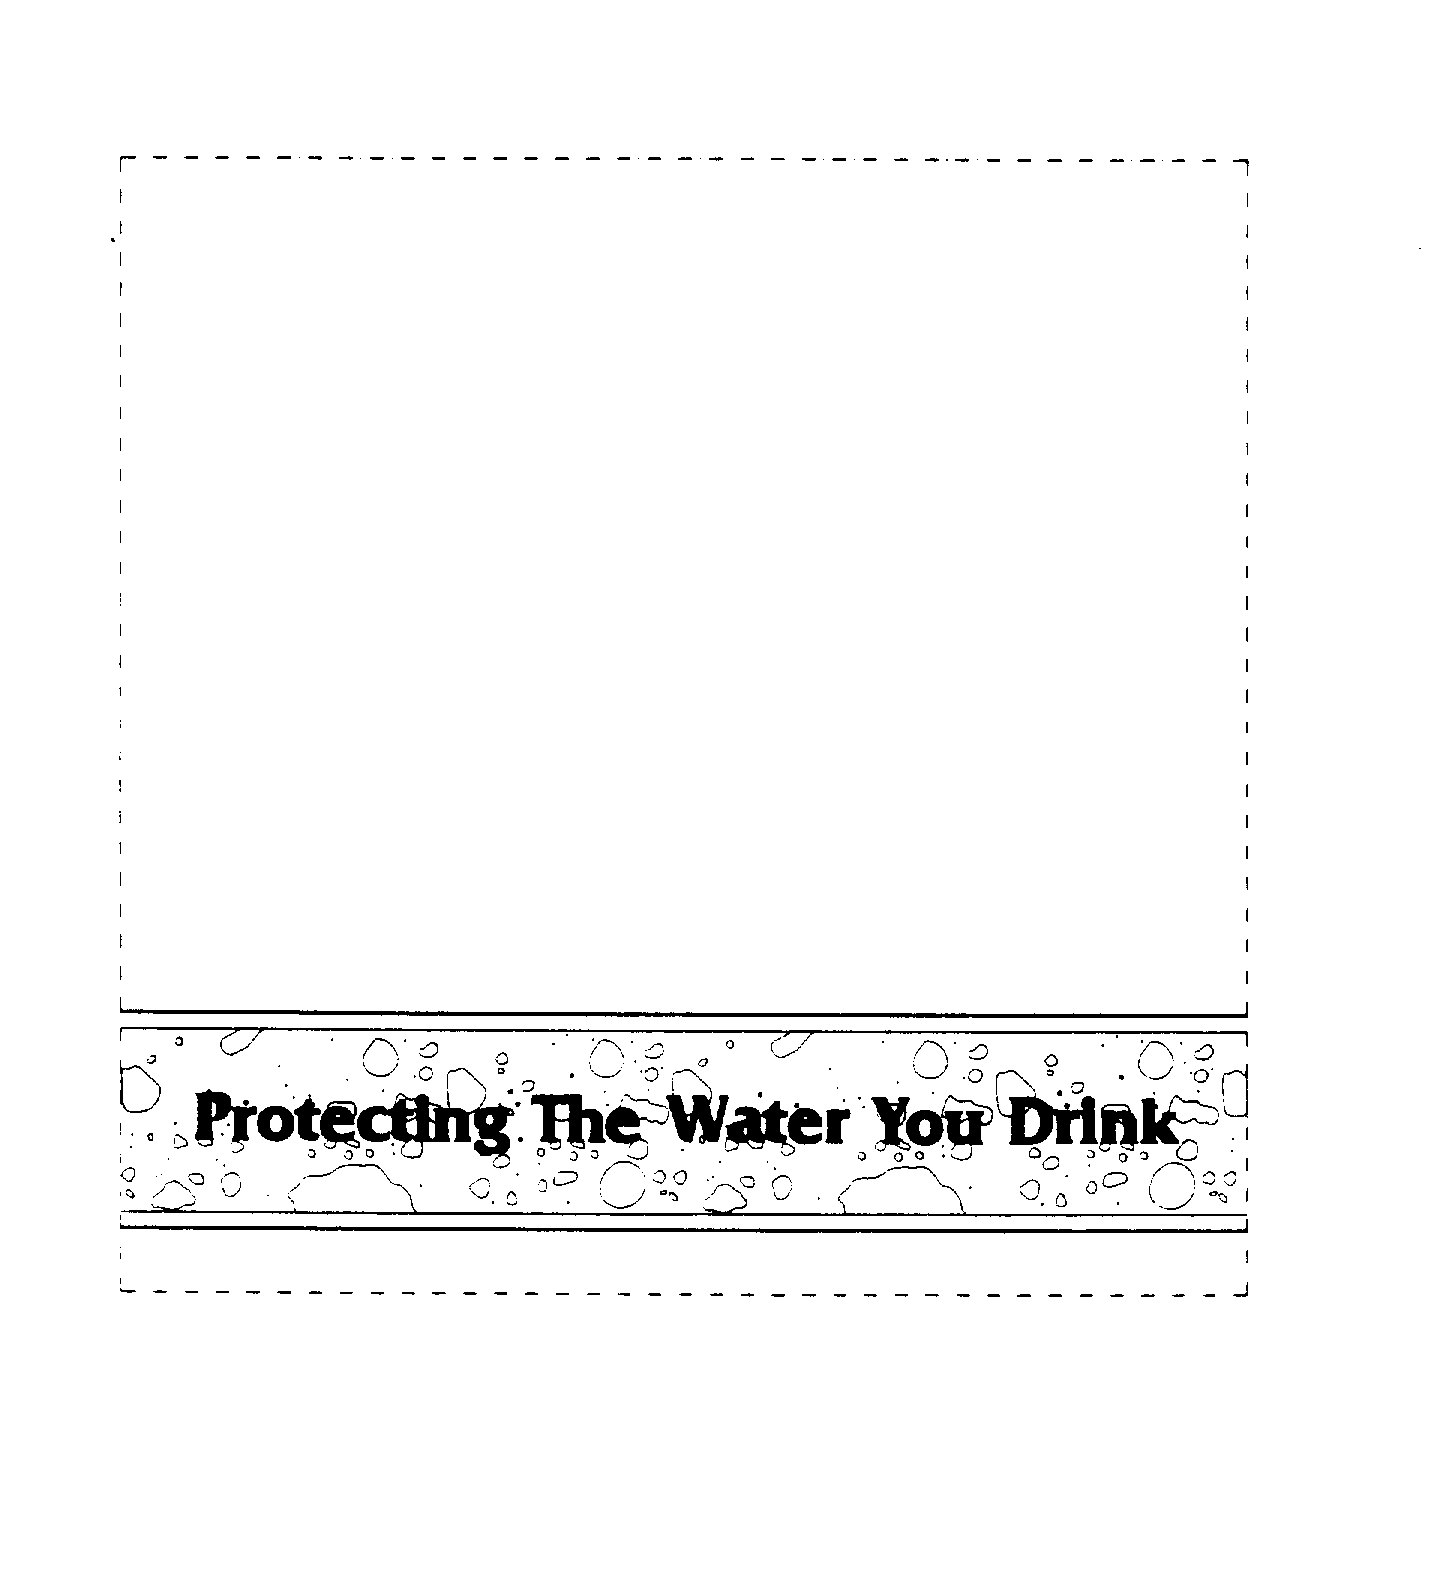  PROTECTING THE WATER YOU DRINK